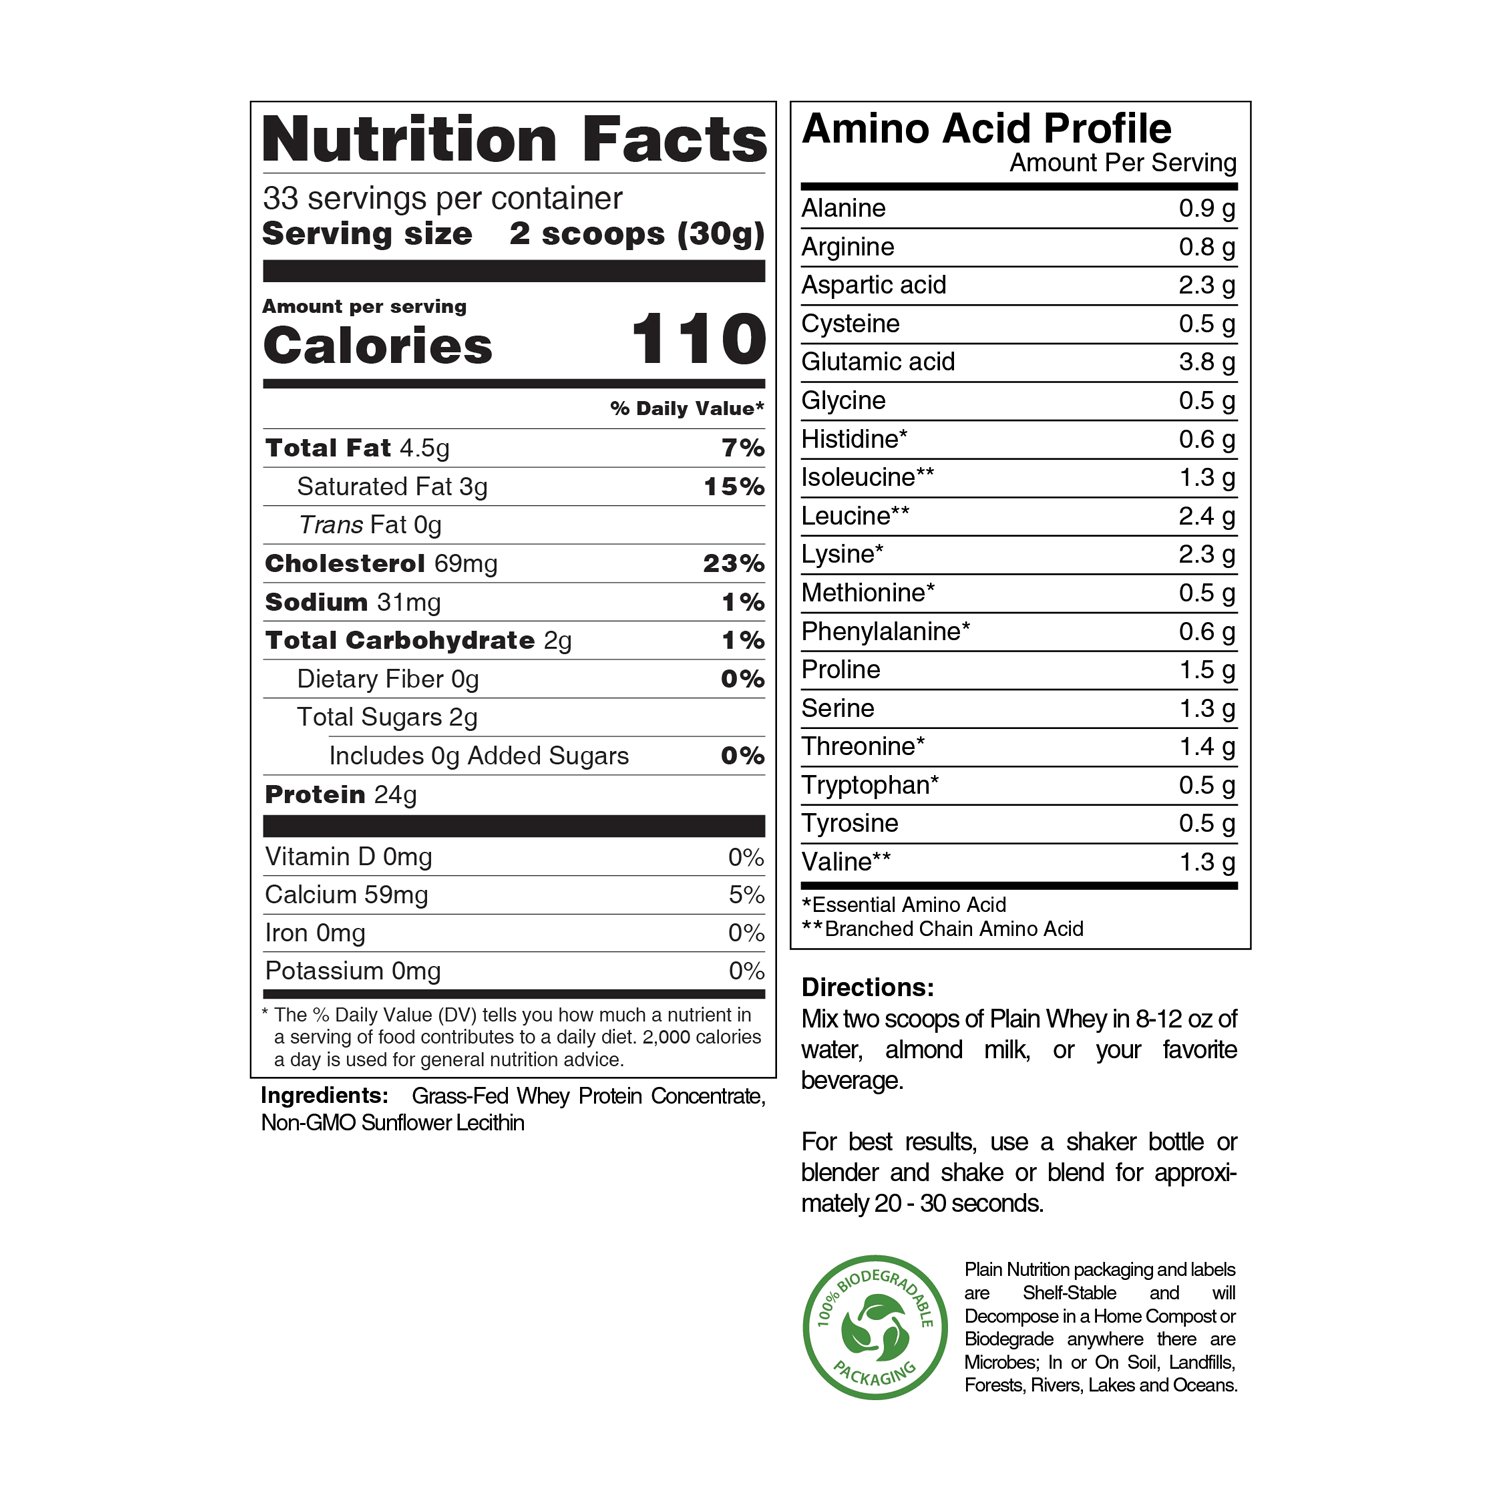 https://www.plainnutrition.ca/wp-content/uploads/grass-fed-whey-protein-powder-nutrition-facts.png